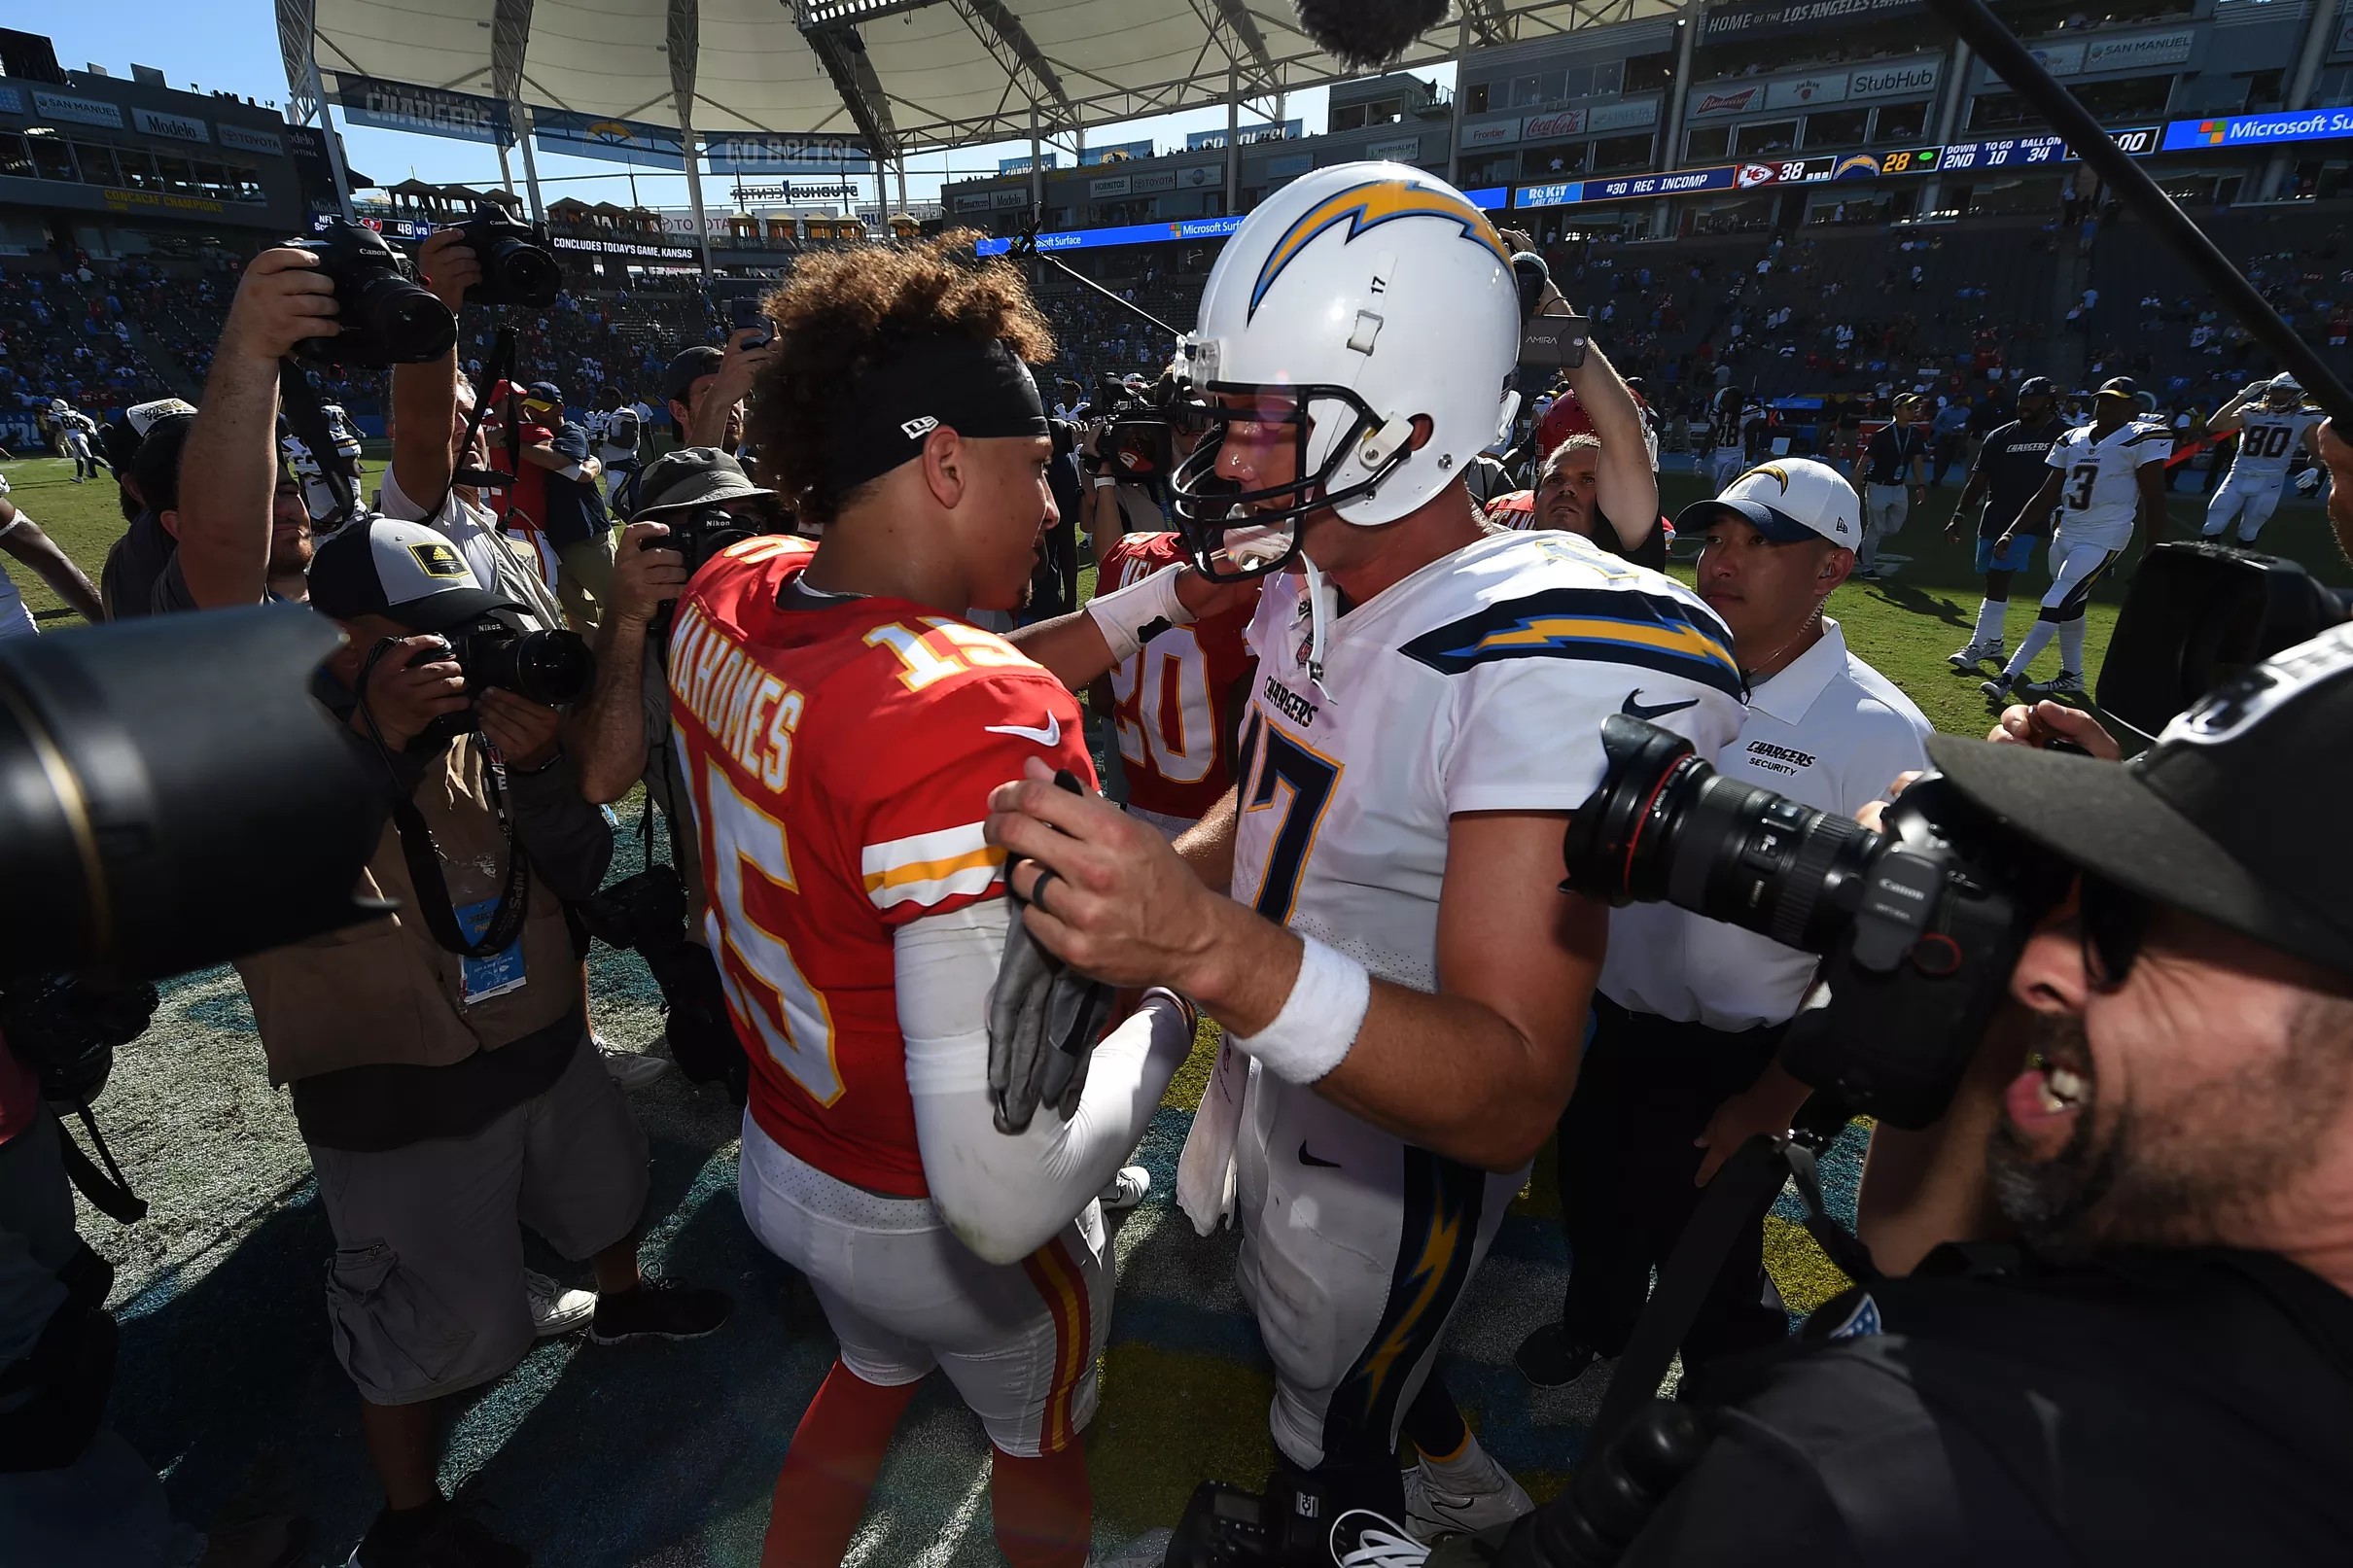 Chiefs make first 2019 game date and time official